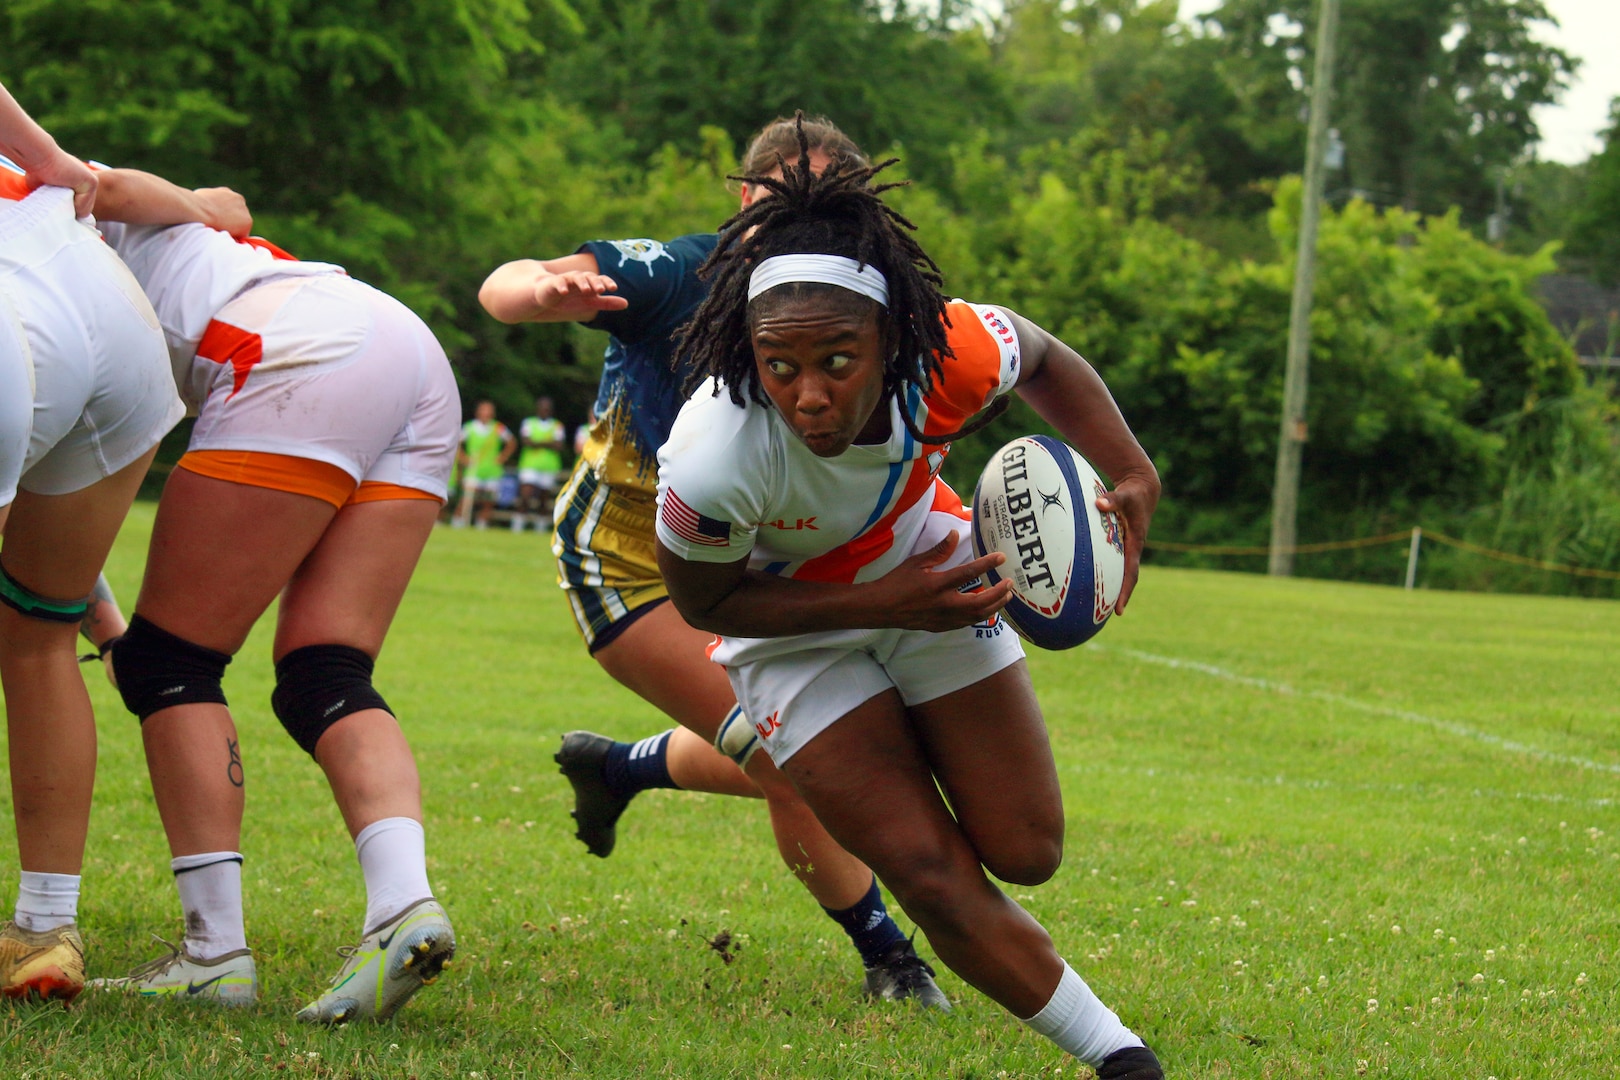 Coast Guard Petty Officer 3rd Class Ra'Shaun Coker of Air Station Barbers Point, Hawaii pulls away from the scrum to score her consecutive try in Coast Guard's 20-14 win over Navy to kick off the 2023 Armed Forces Sports Women's Rugby Championship held in conjunction with the Cape Fear 7's Rugby Tournament in Wilmington, N.C.  Championship features teams from the Army, Marine Corps, Navy, Air Force (with Space Force players), and Coast Guard.  (Dept. of Defense Photo by Mr. Steven Dinote, Released)